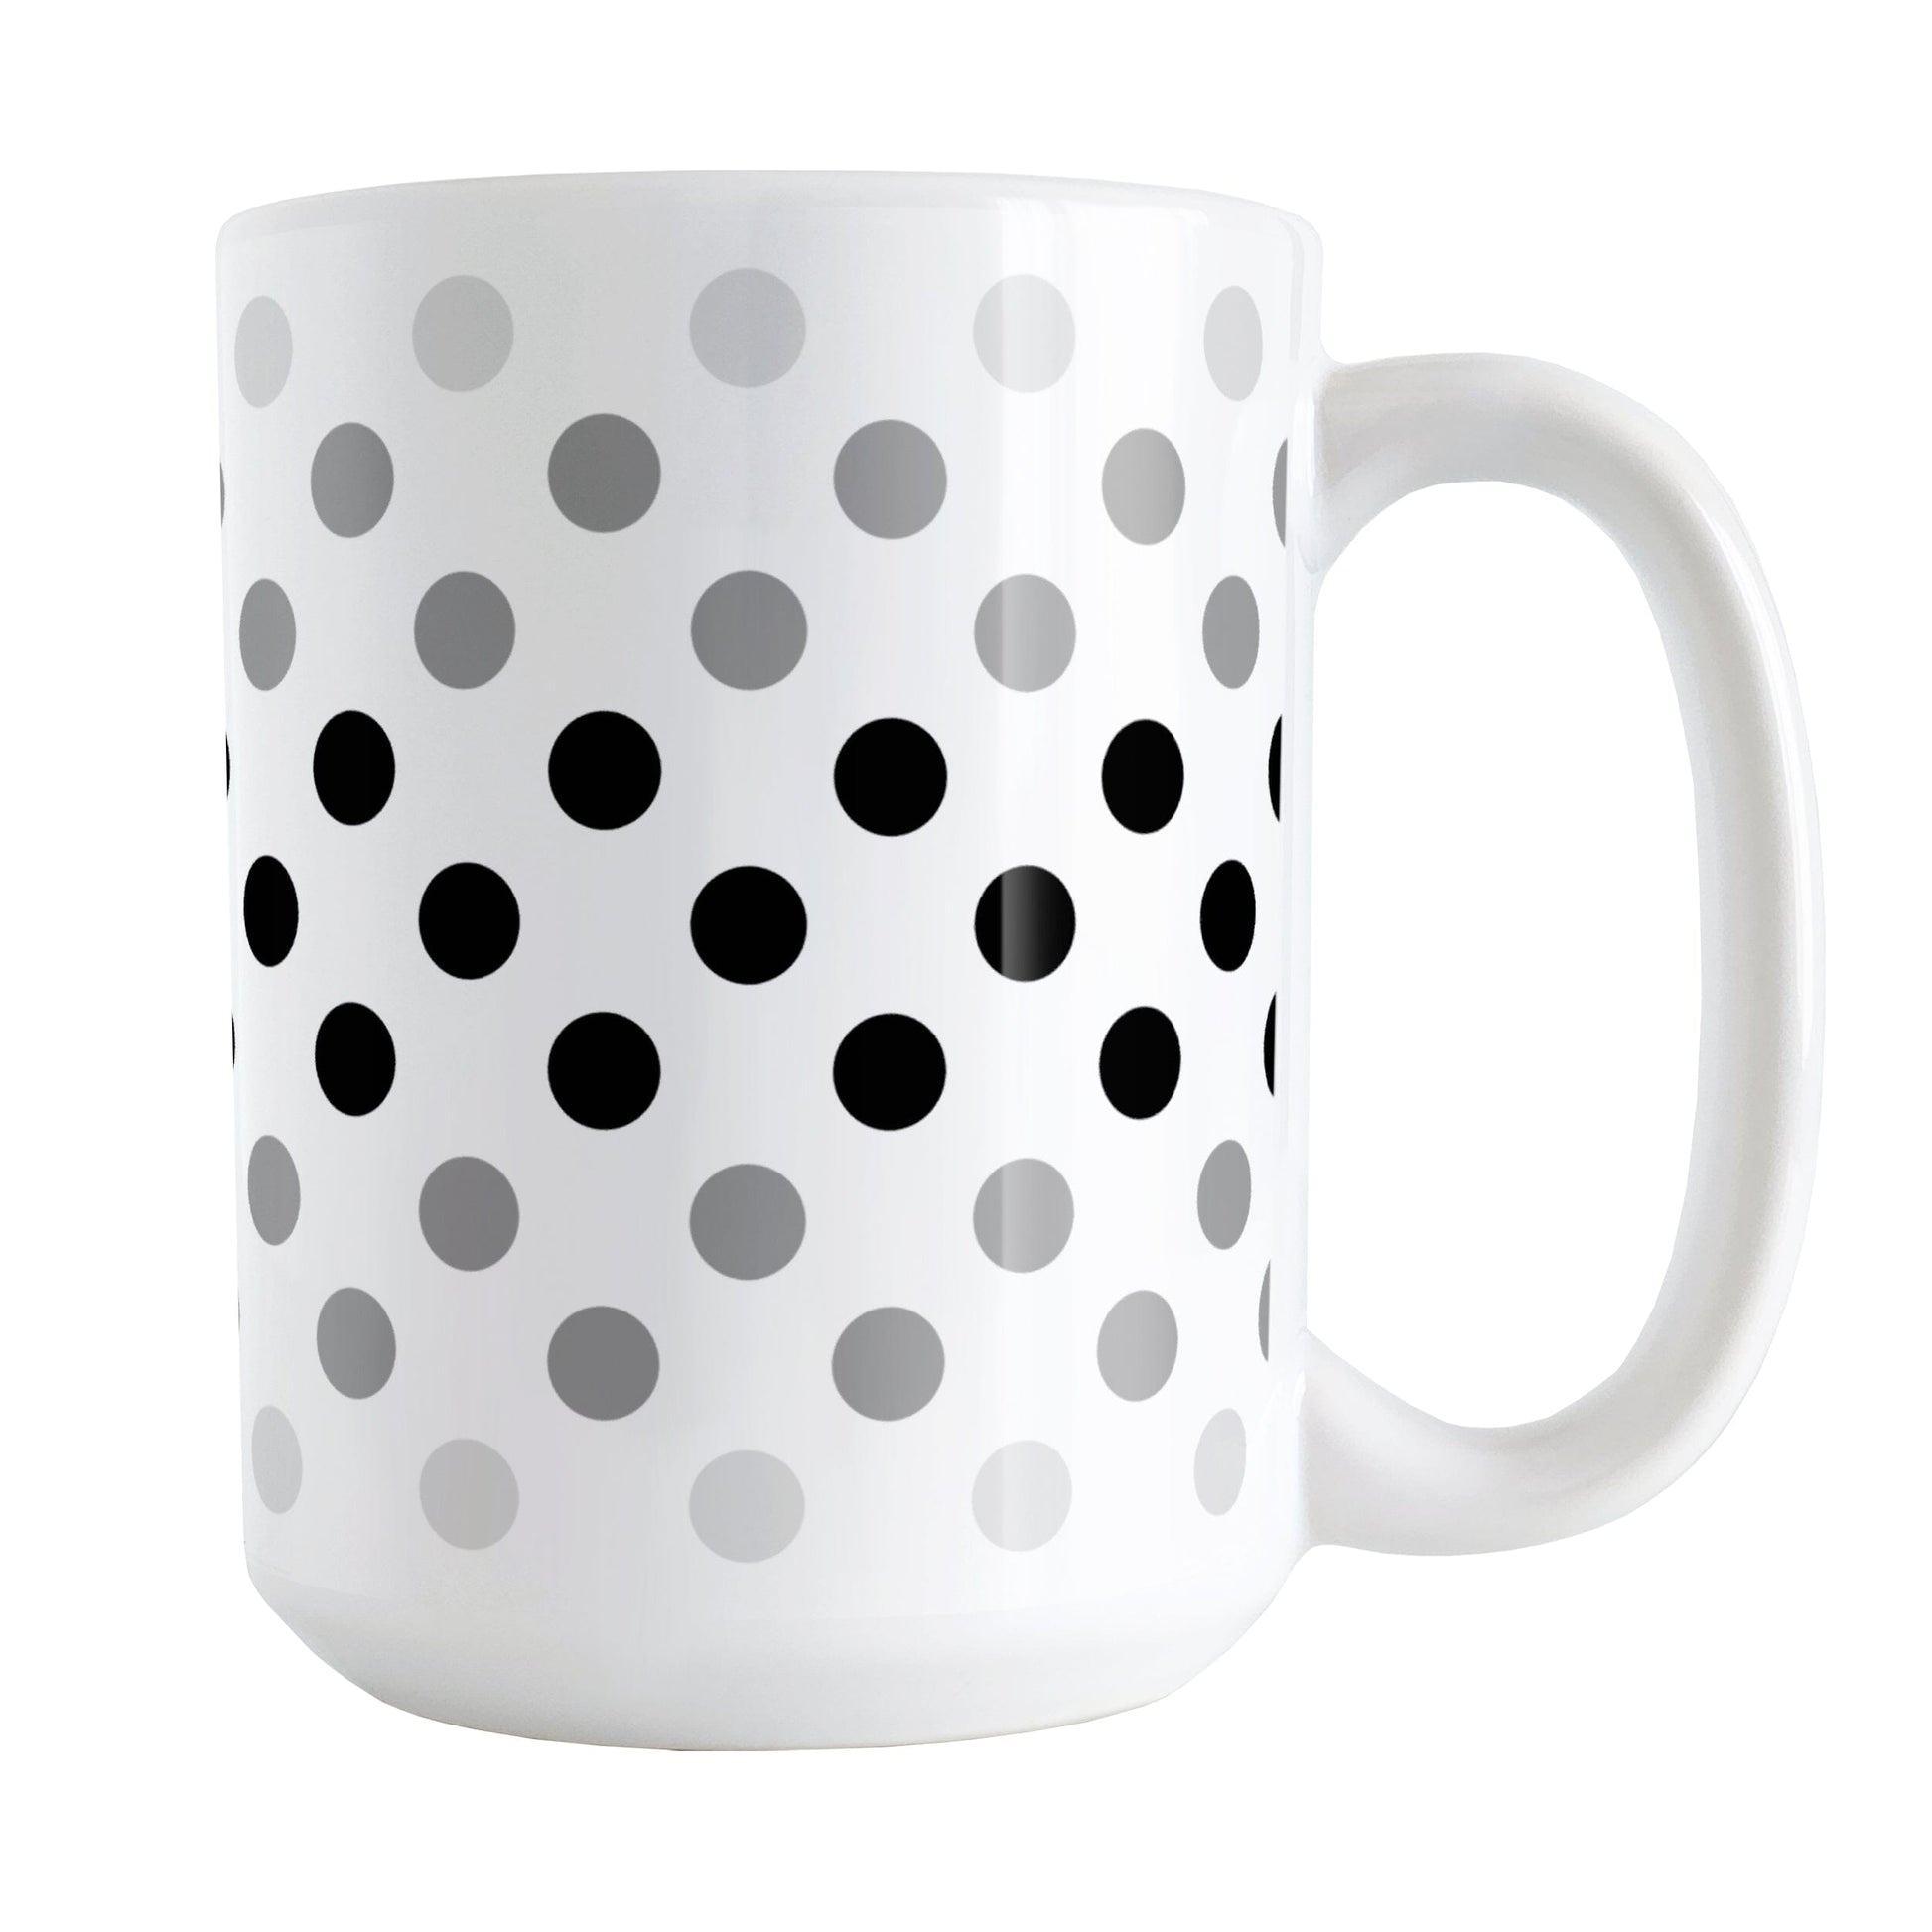 Polka Dots in Black Gray Mug (15oz) at Amy's Coffee Mugs. A ceramic coffee mug designed with polka dots in different shades of black and gray, with the black across the middle and the lighter shades of gray along the top and bottom, in a pattern that wraps around the mug to the handle. 